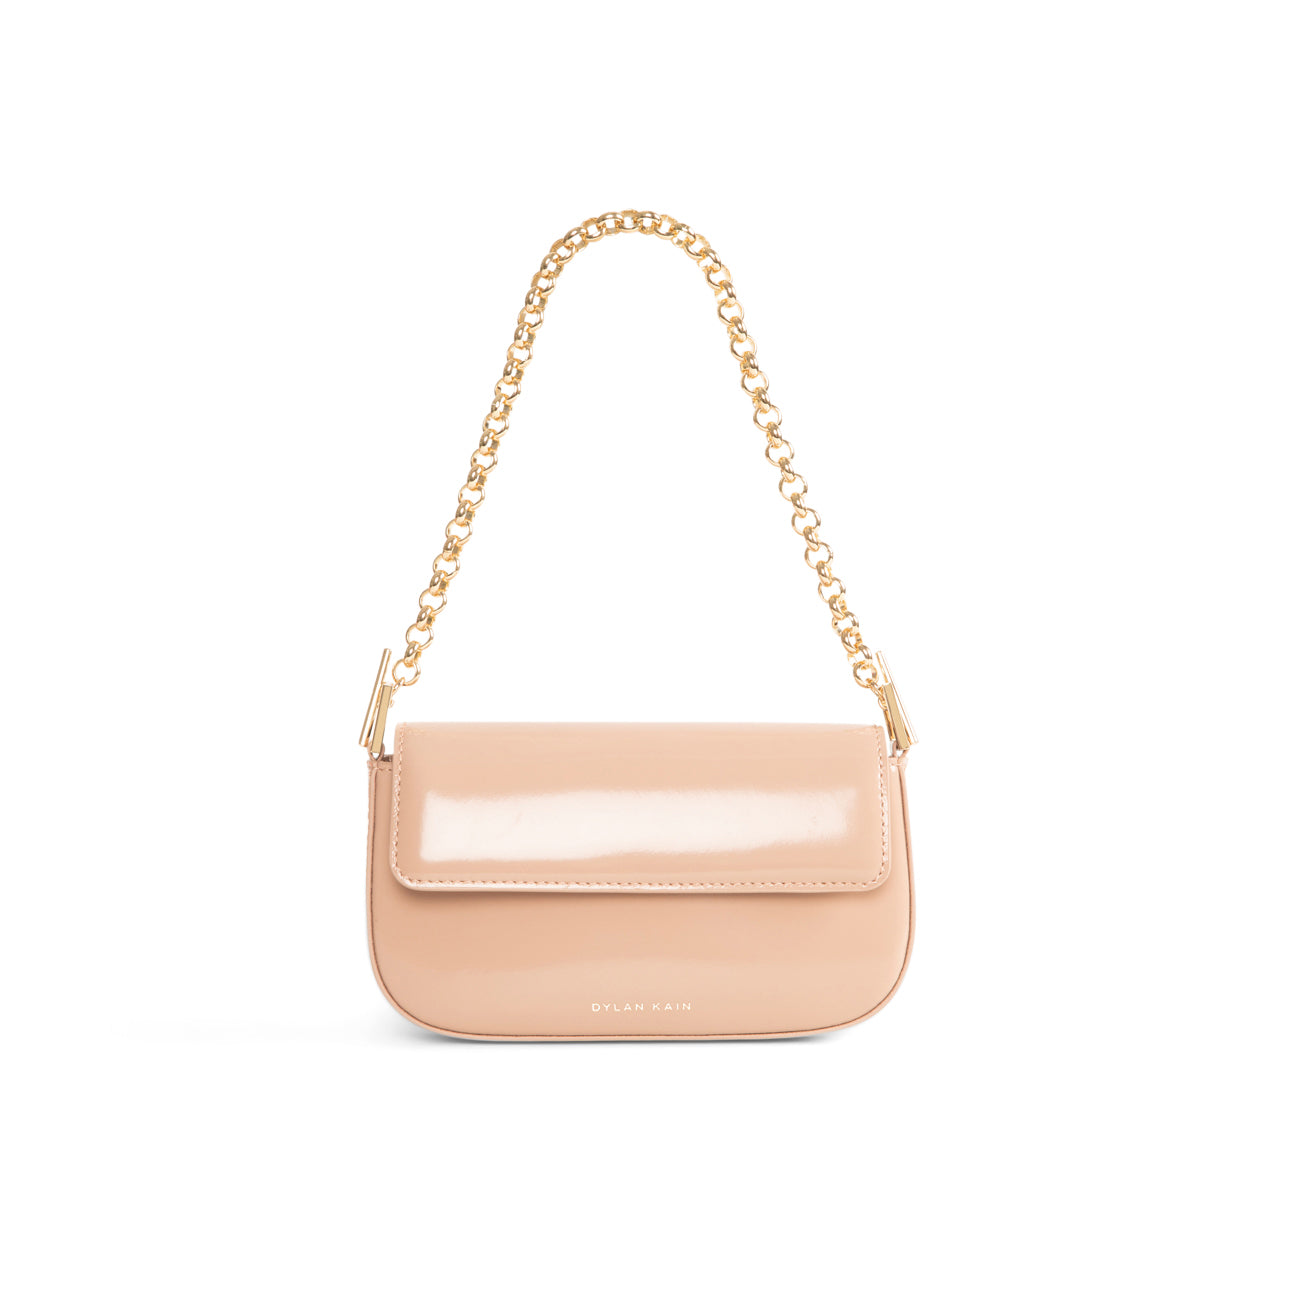 The Amelia Patent Bag Fawn - Gift Edit